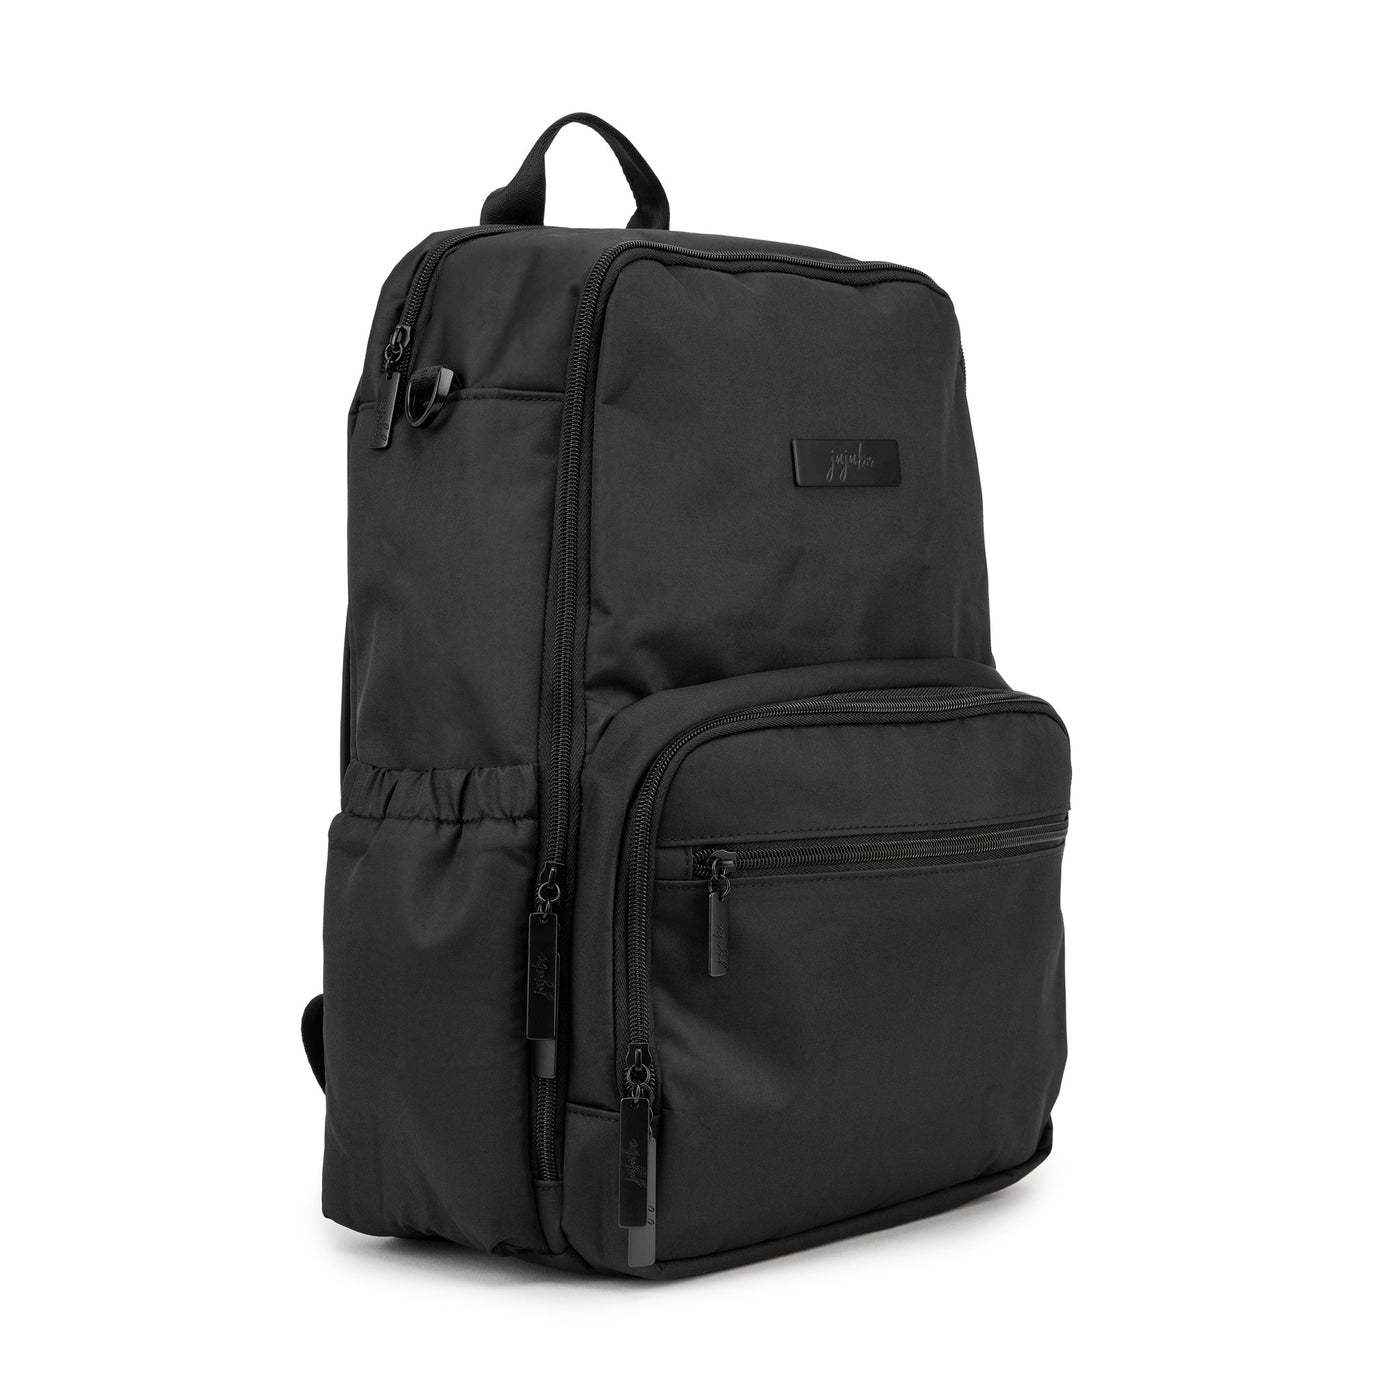 Zealous Backpack - Black Out by JuJuBe